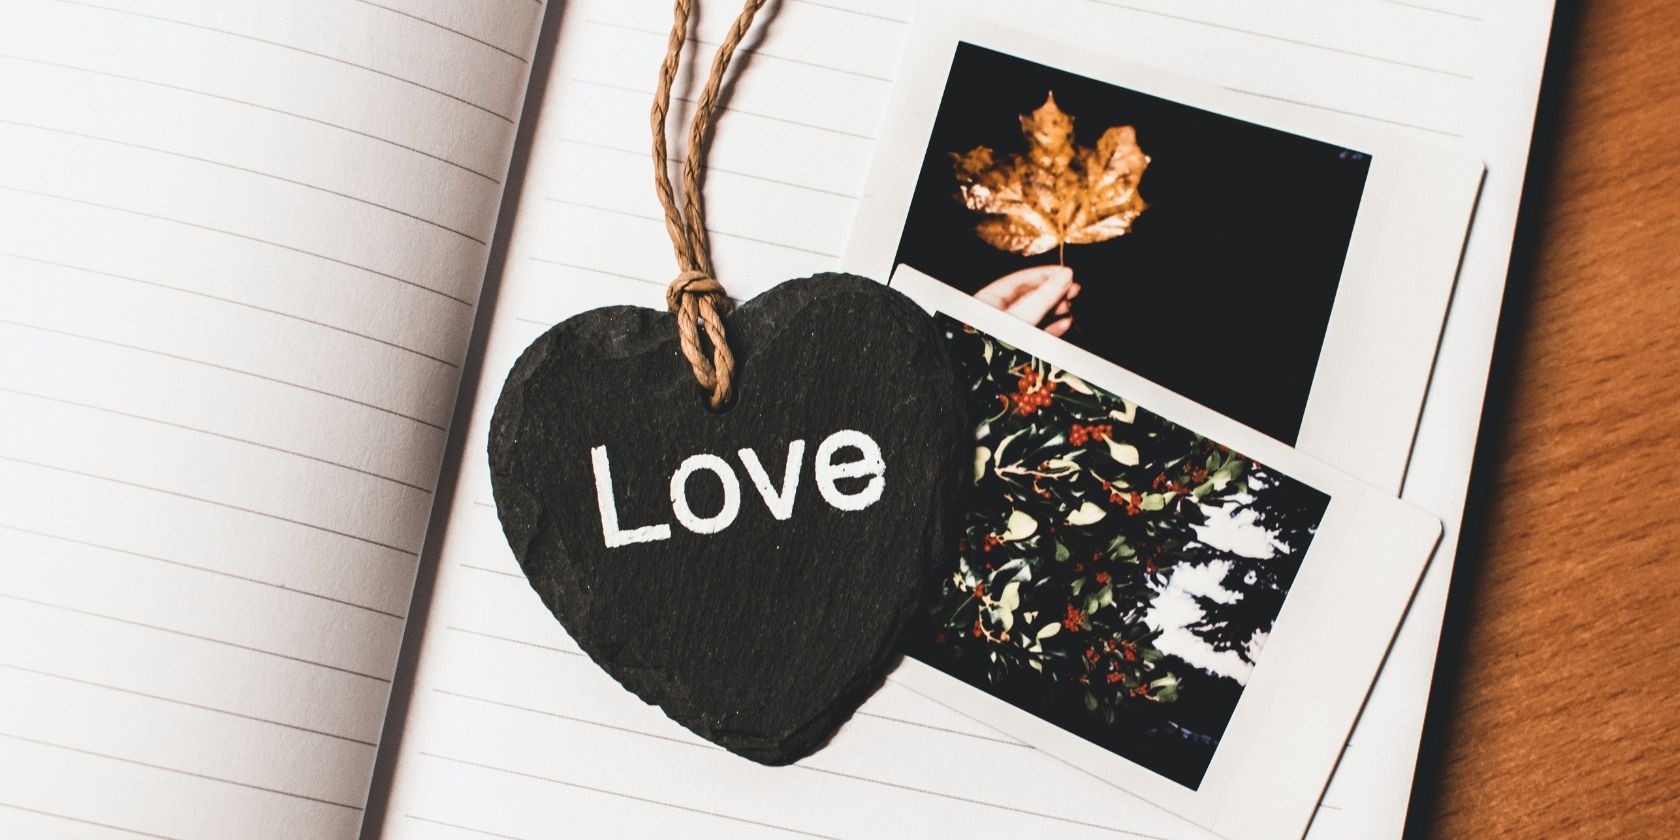 Heart shaped 'Love' bookmark on top of two polaroids in an open book